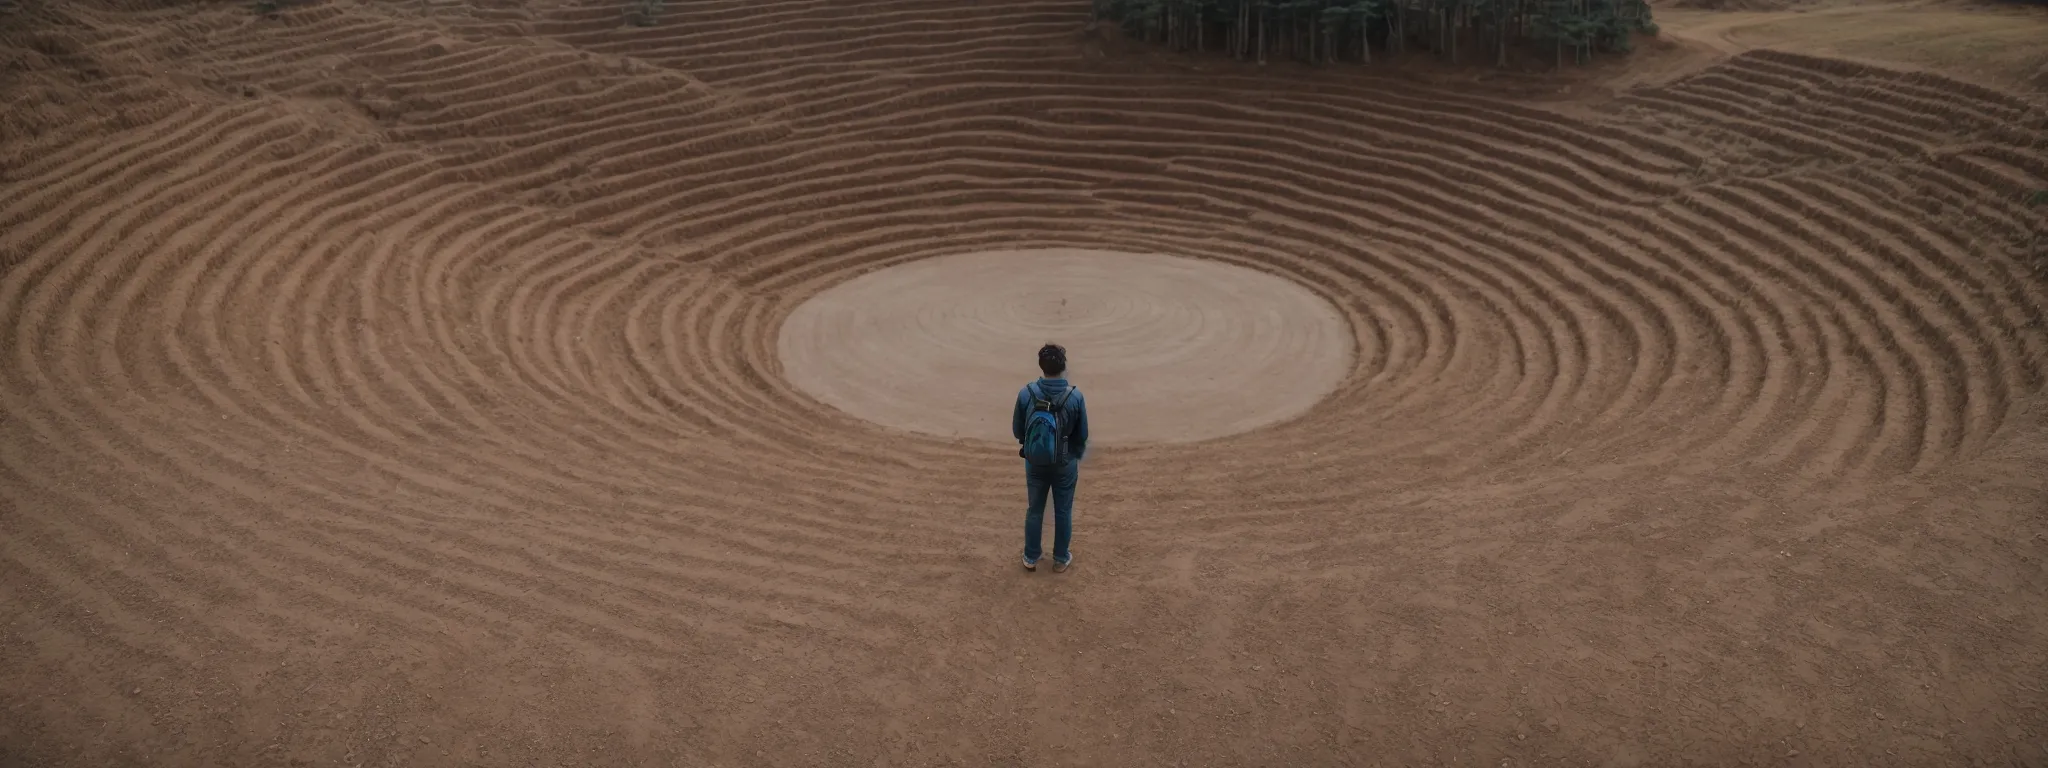 a person standing at the entrance of a labyrinth, ready to navigate its complex paths armed with a compass and a notepad.